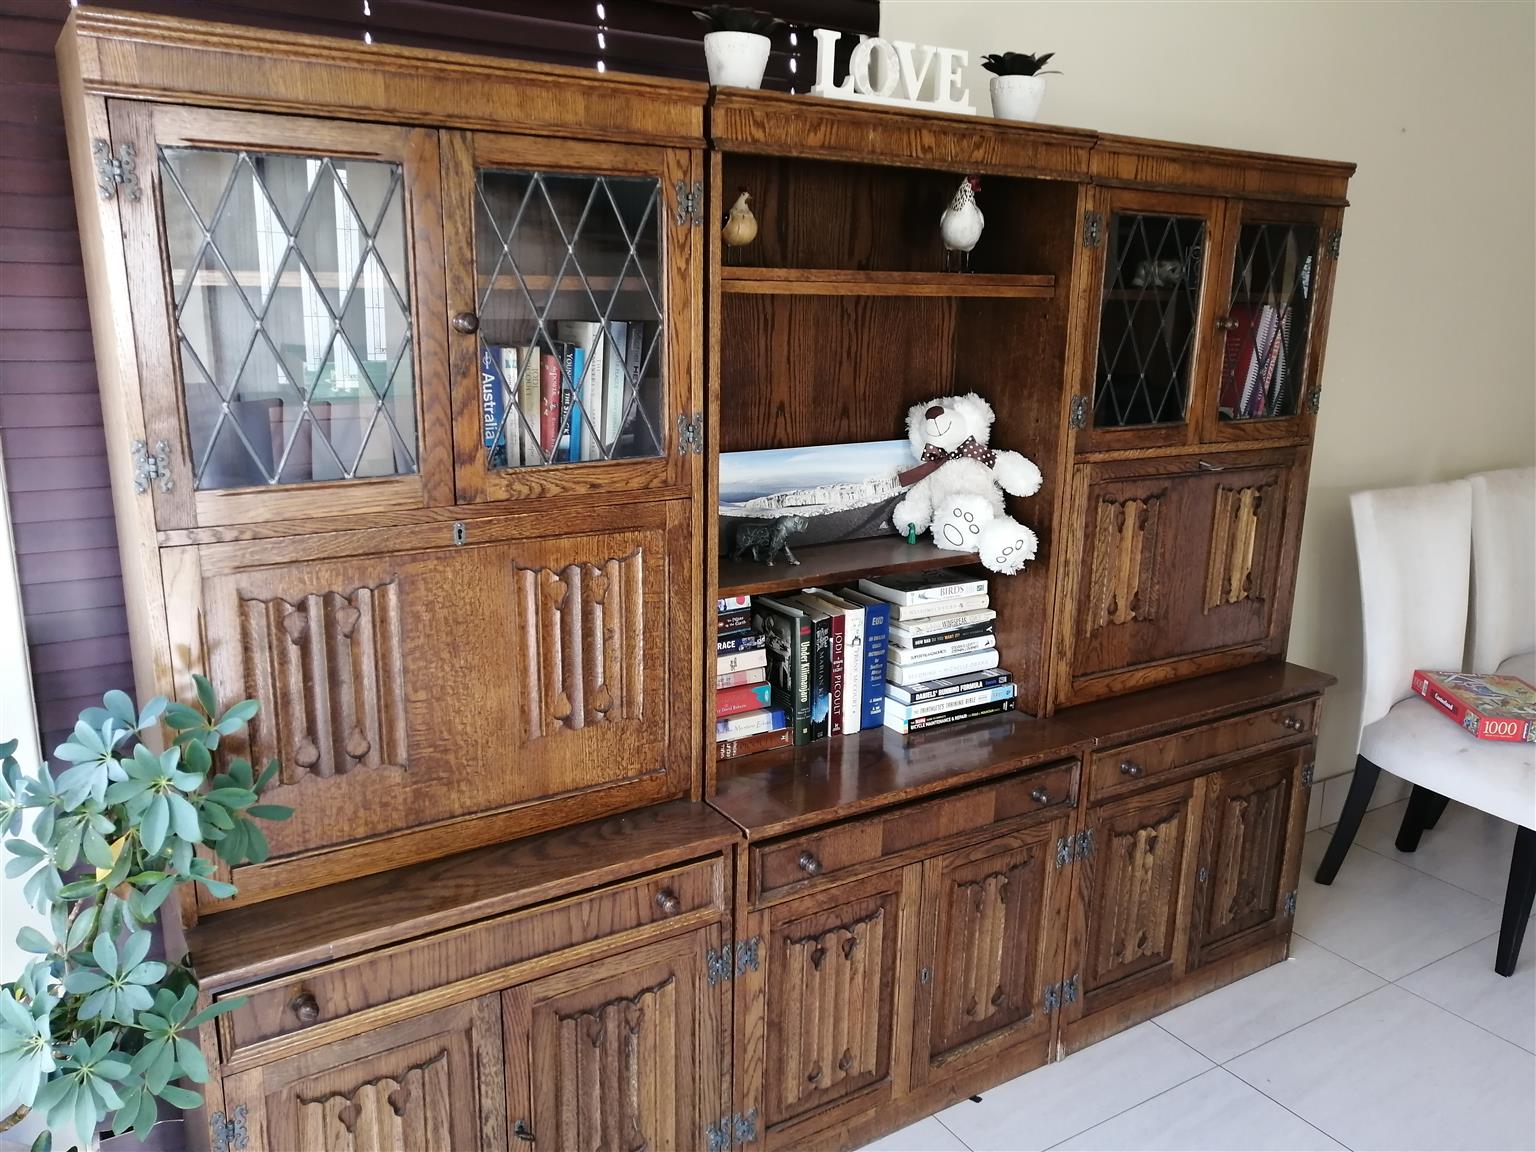 Large wooden cabinet